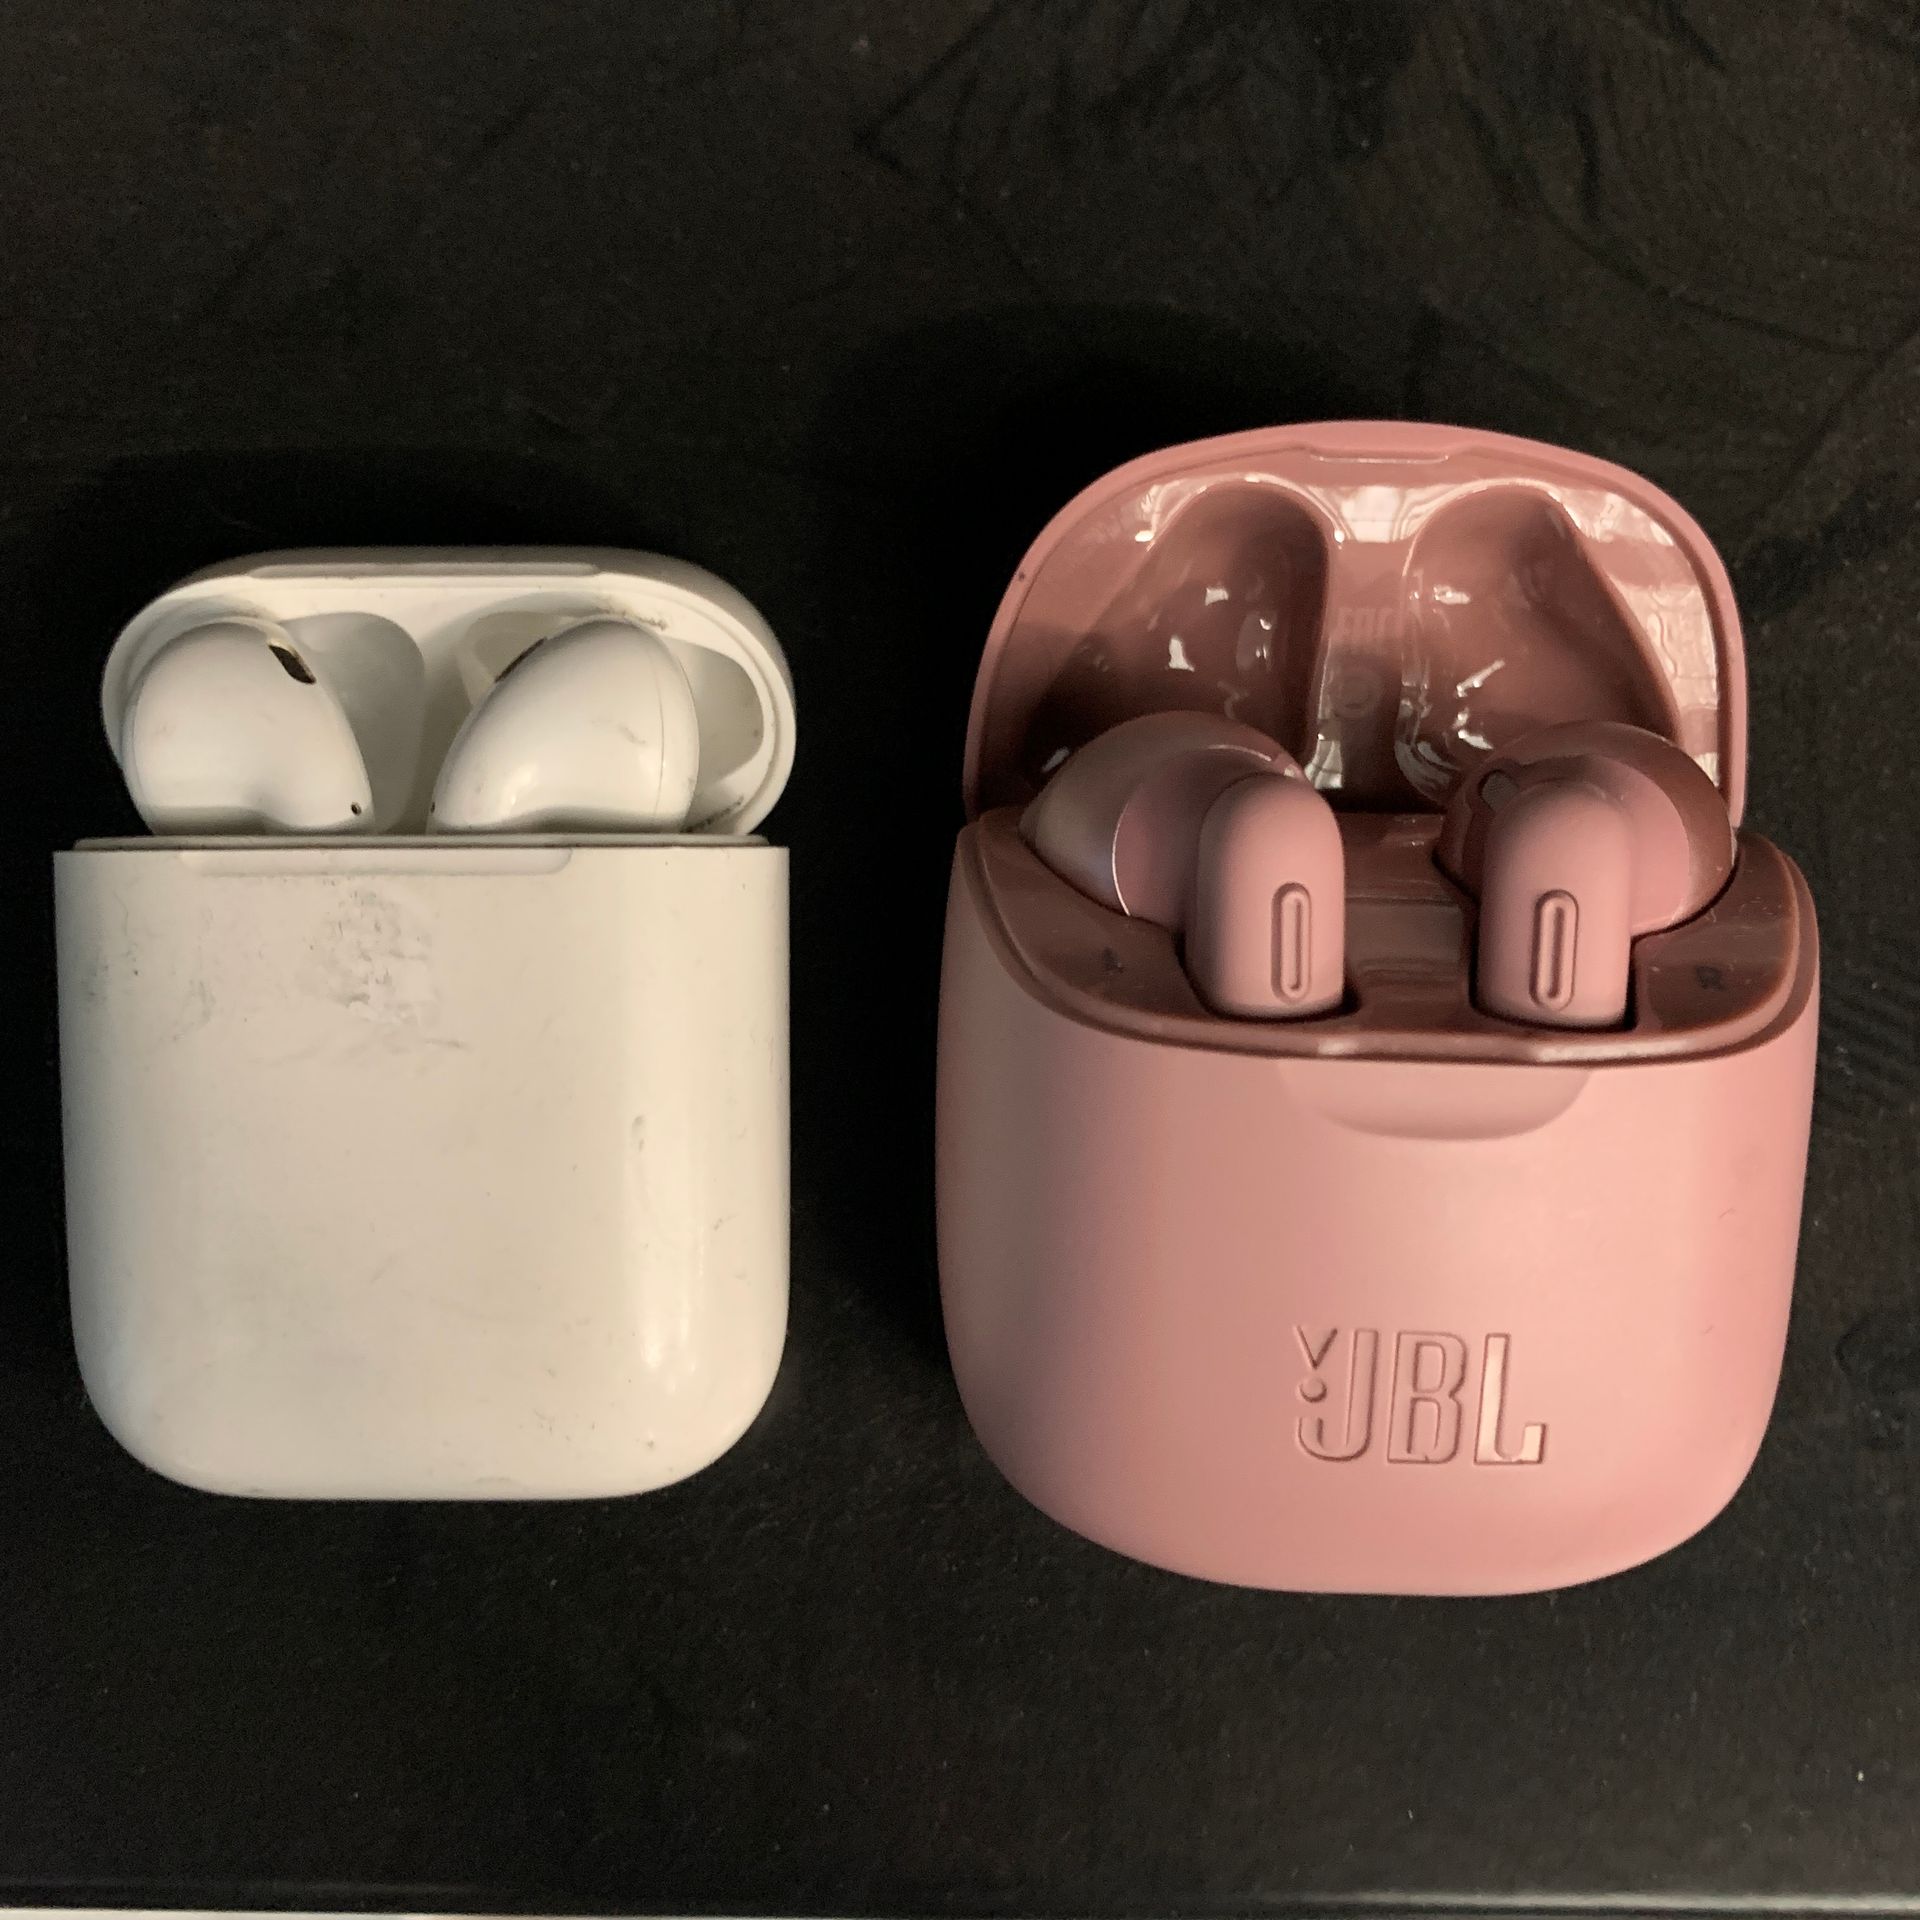 Null Lot of 17 Used Wireless Headphones including 10 Airpods